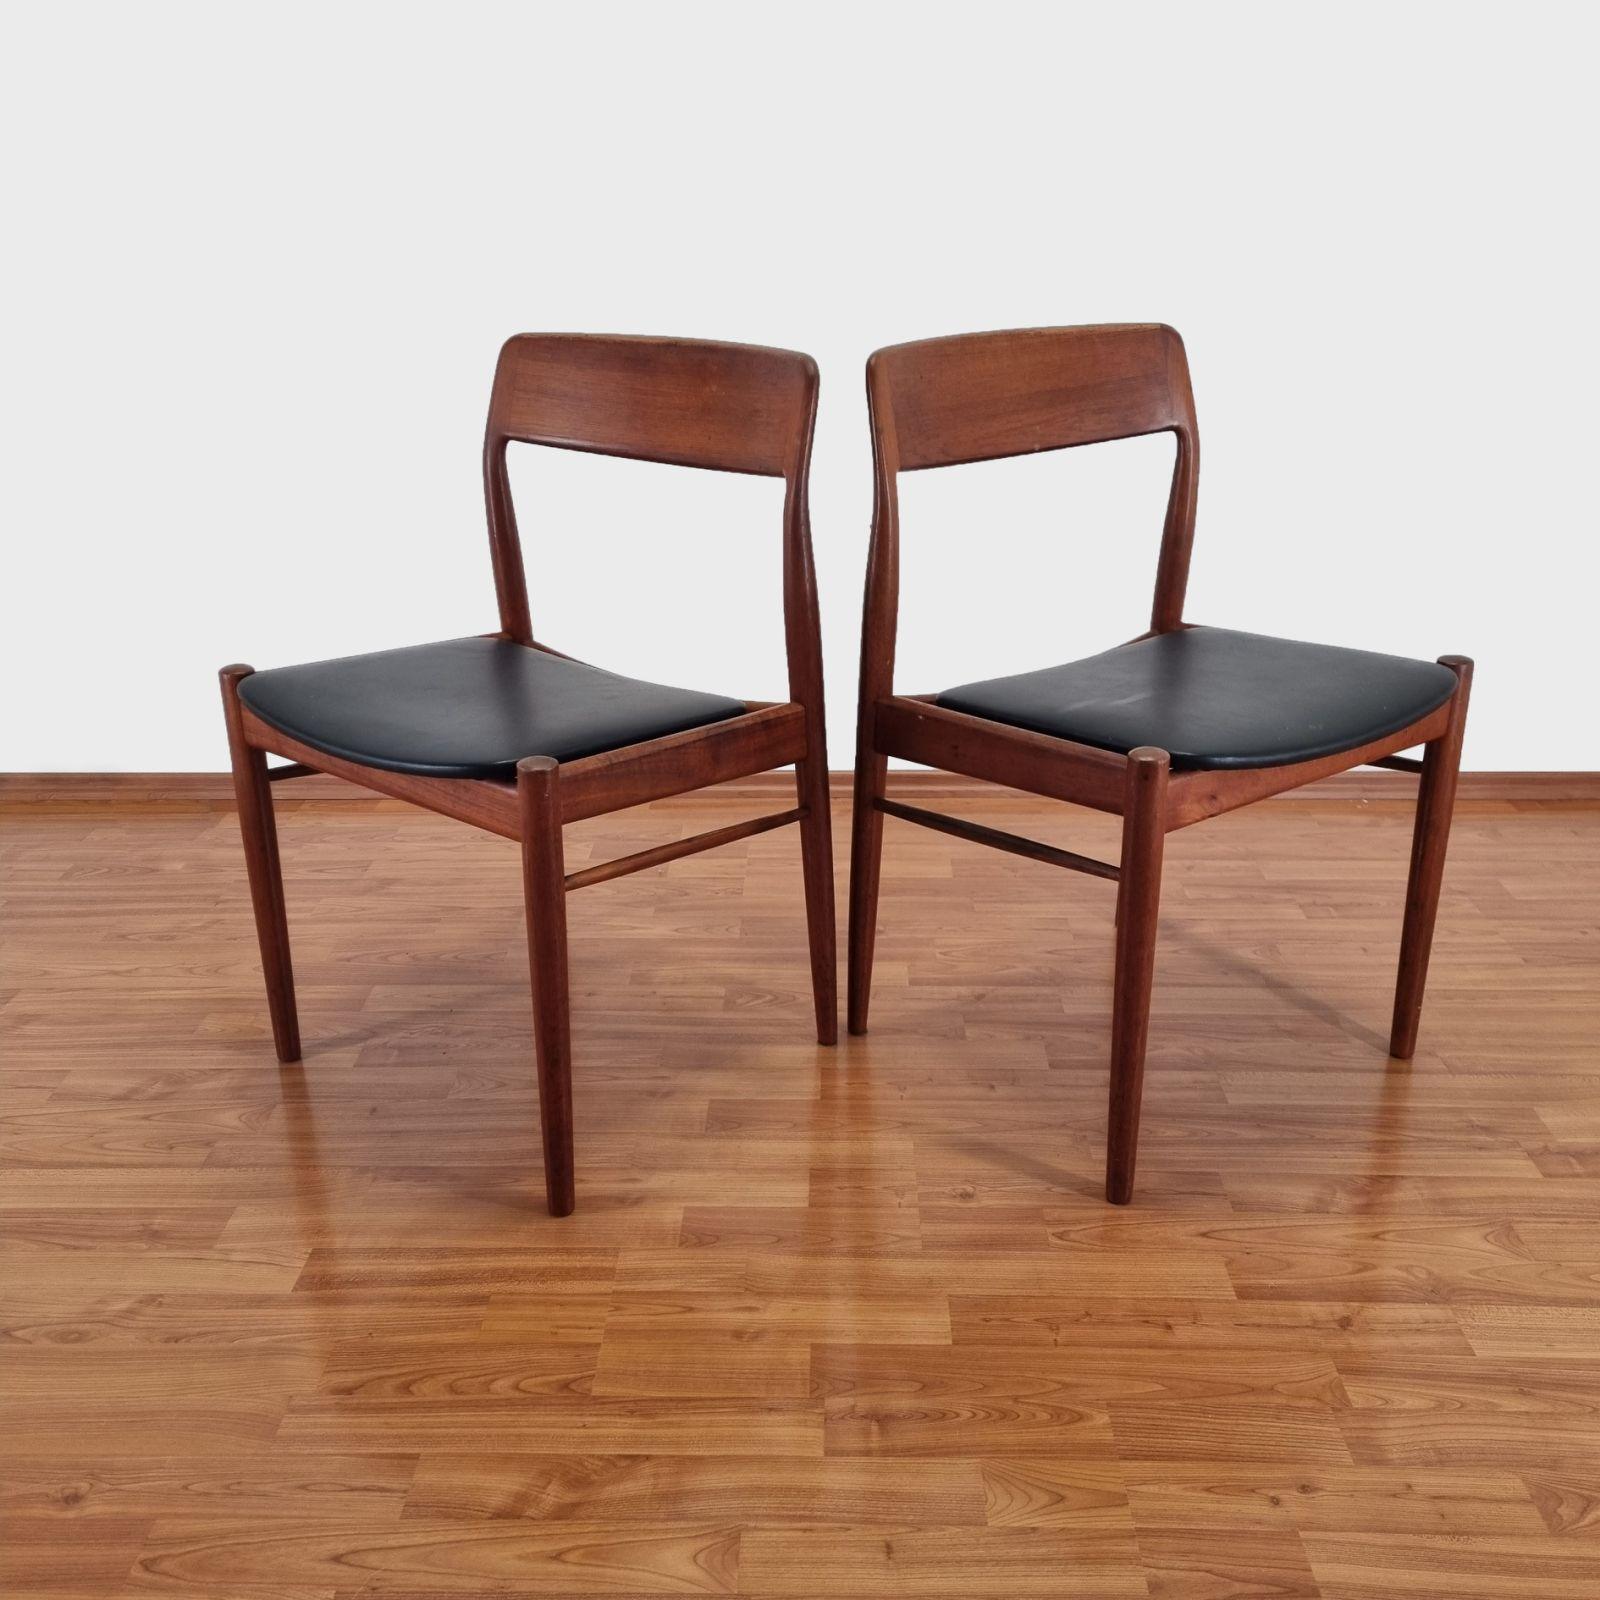 Leather Scandinavian Modern Teak Dining Chairs, Design By Niels Otto Möller, Denmark 60s For Sale